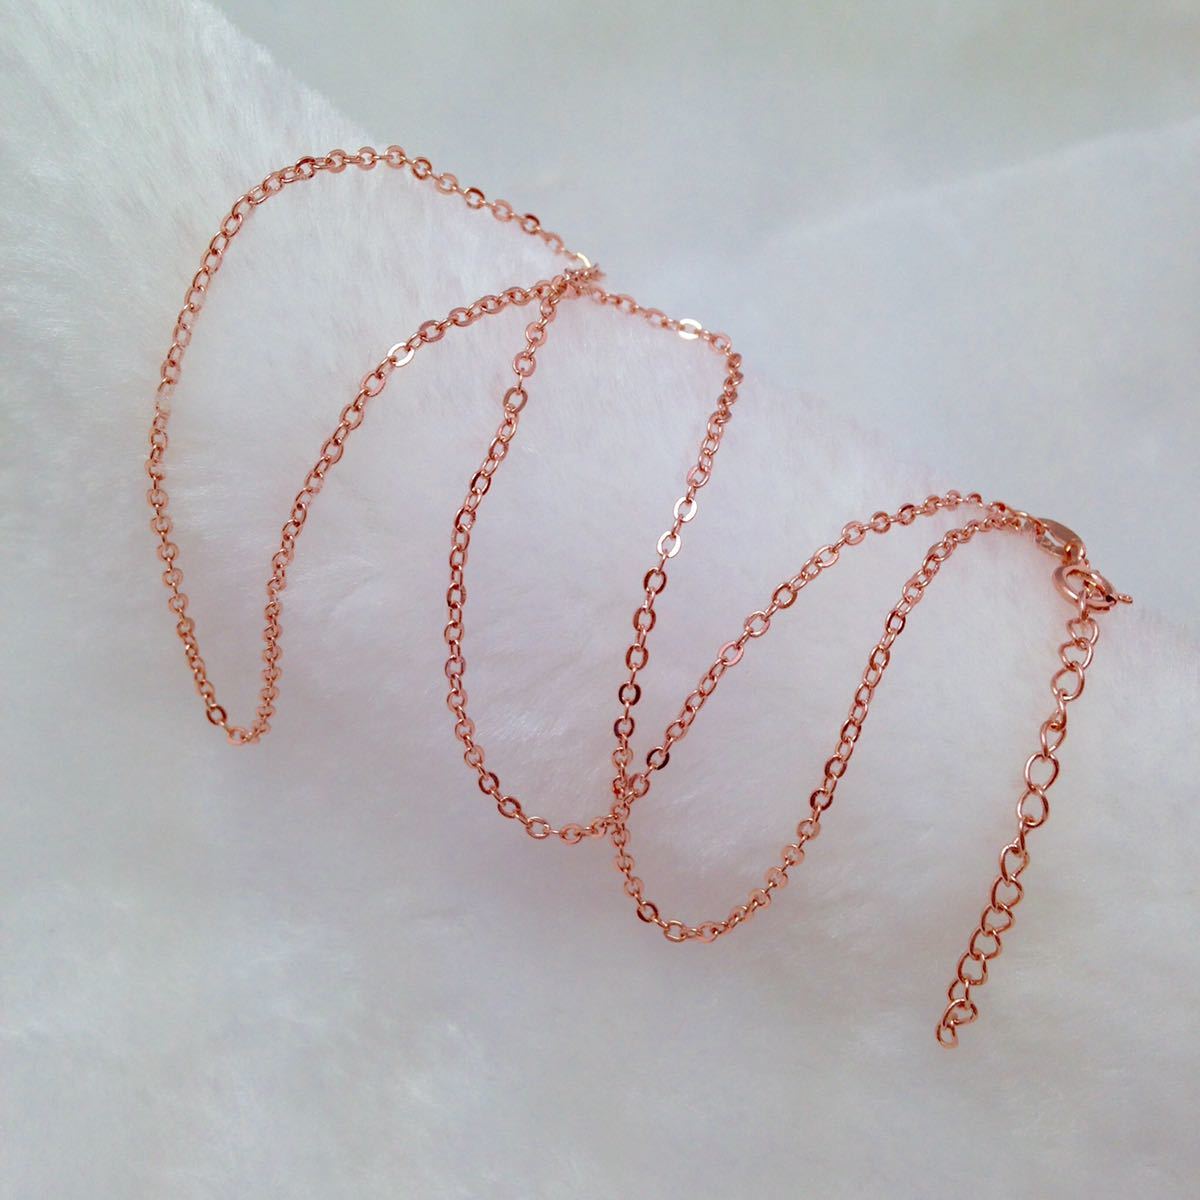  new goods pink gold. S925. small legume chain 40cm adjuster 5cm